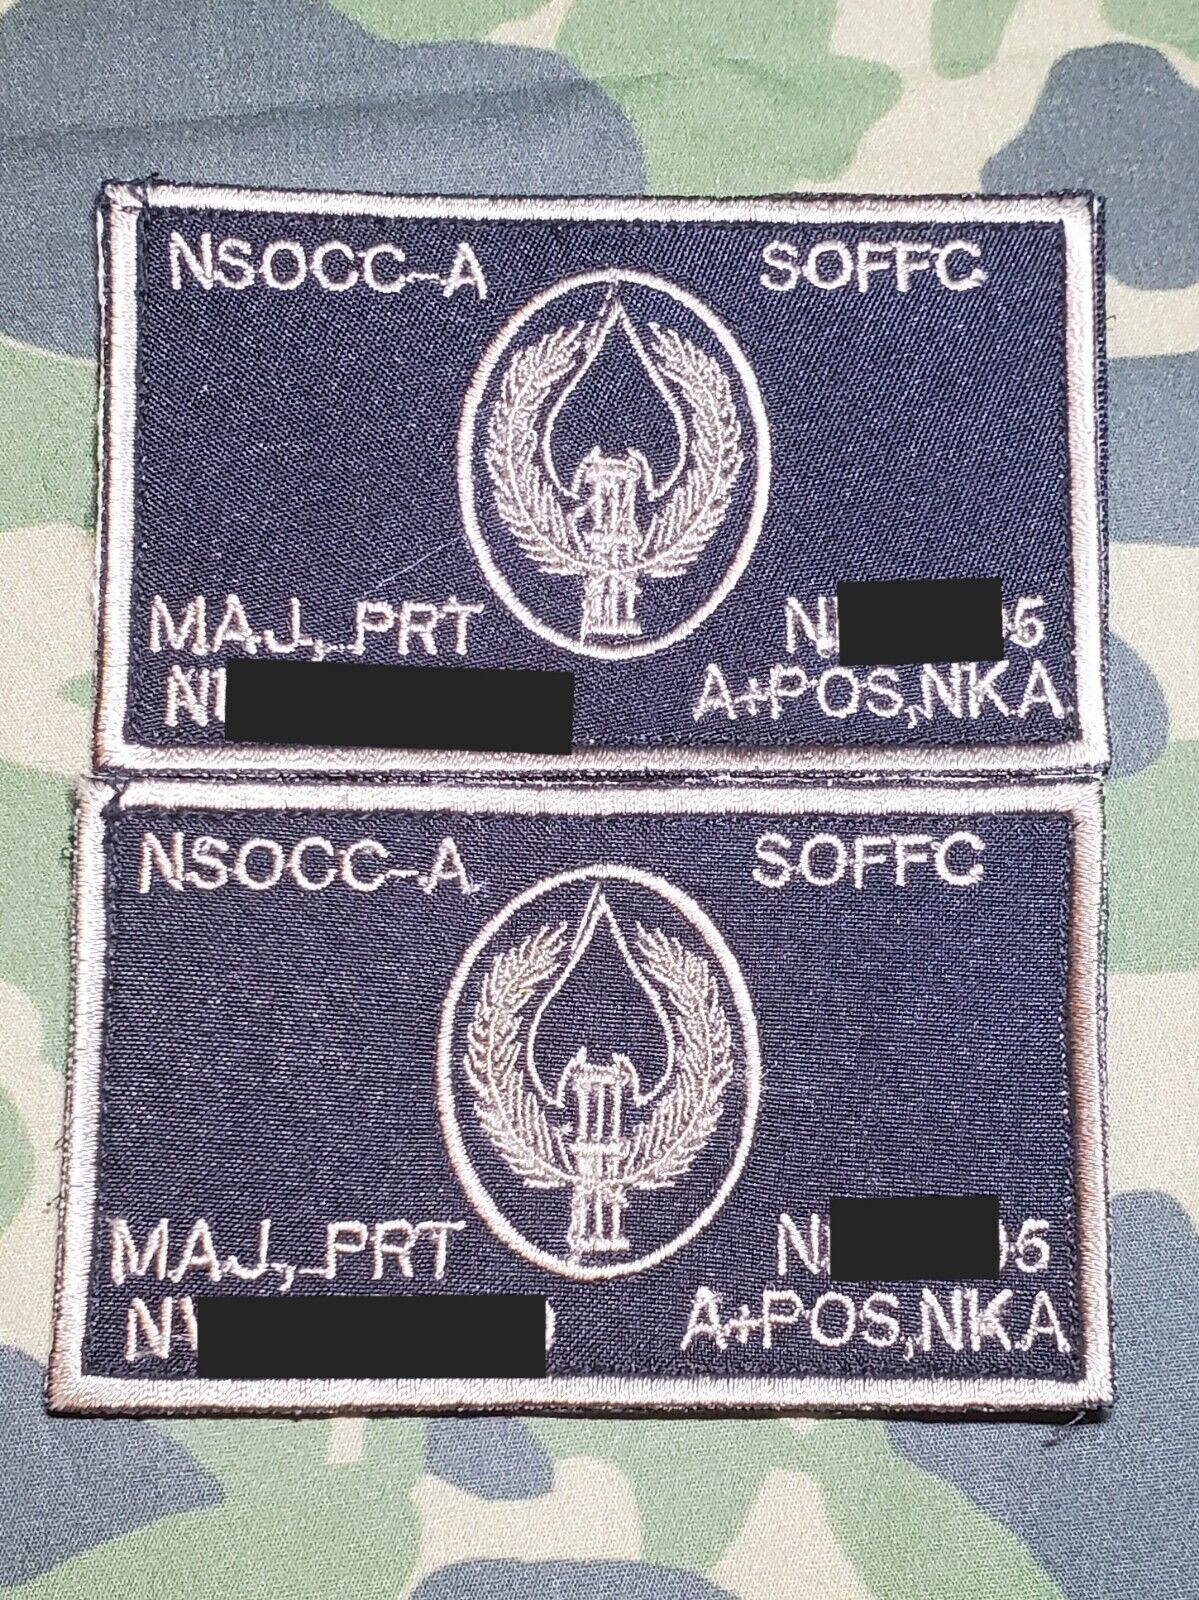 NATO Special Ops NSOCC-A SOFFC Personalized Theater Made OEF Afghanistan Patch